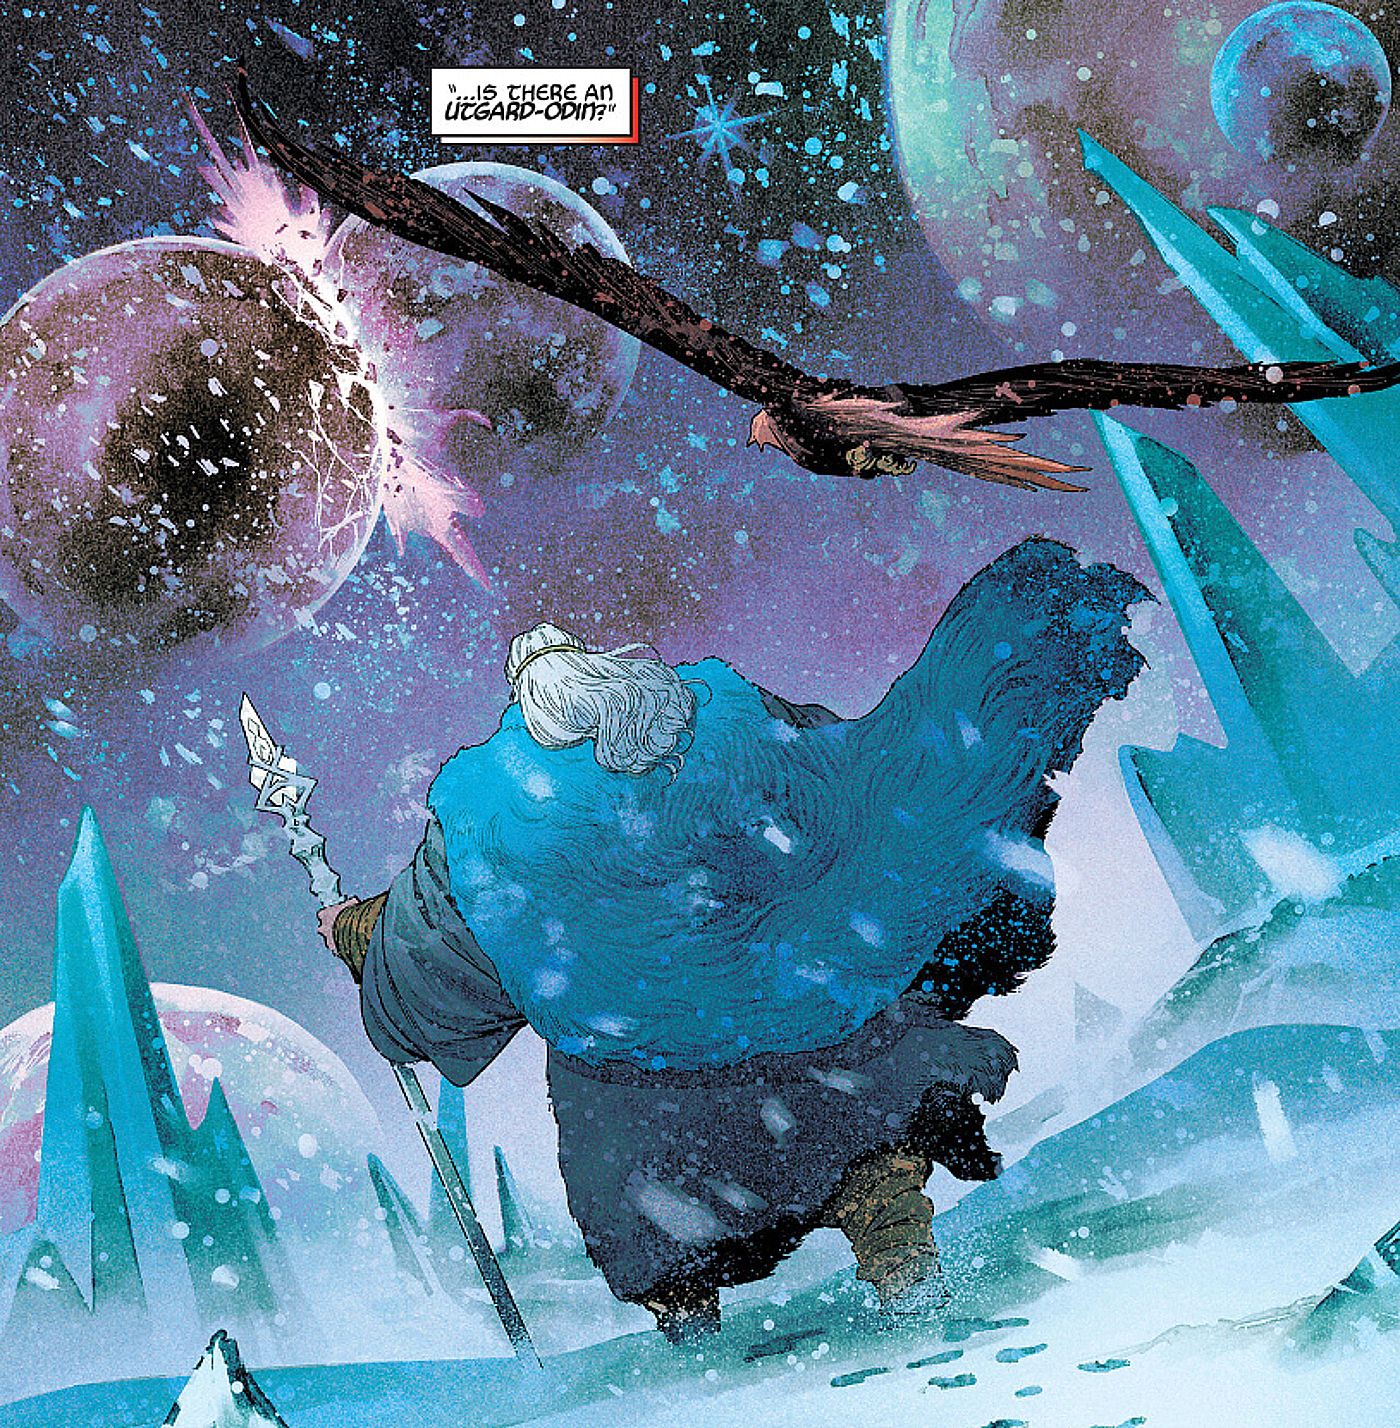 Immortal Thor #7 final page, Thor asks 